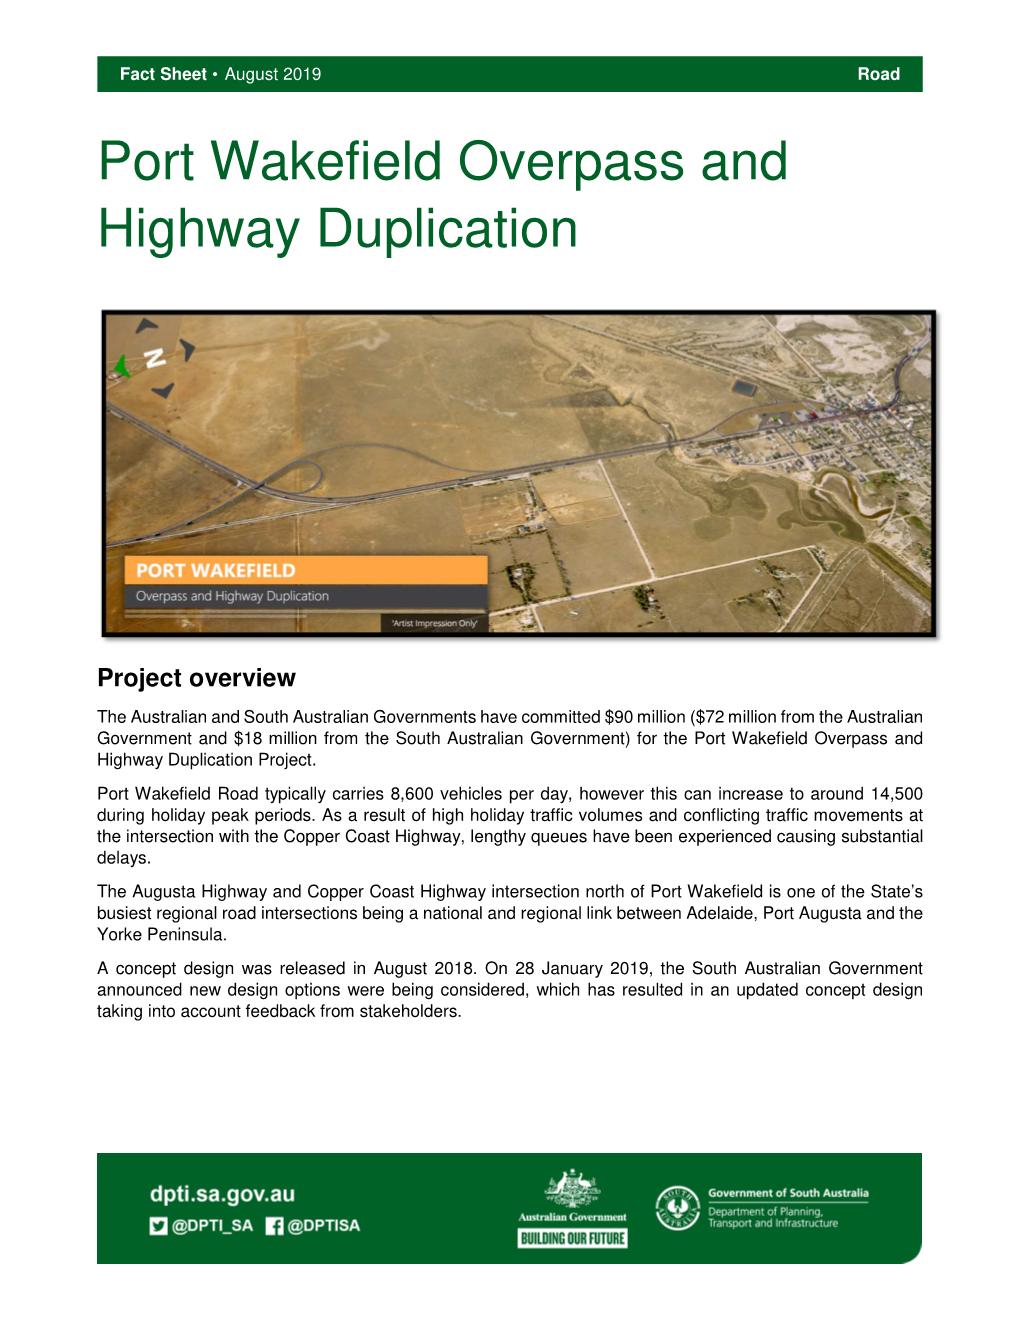 Port Wakefield Overpass and Highway Duplication